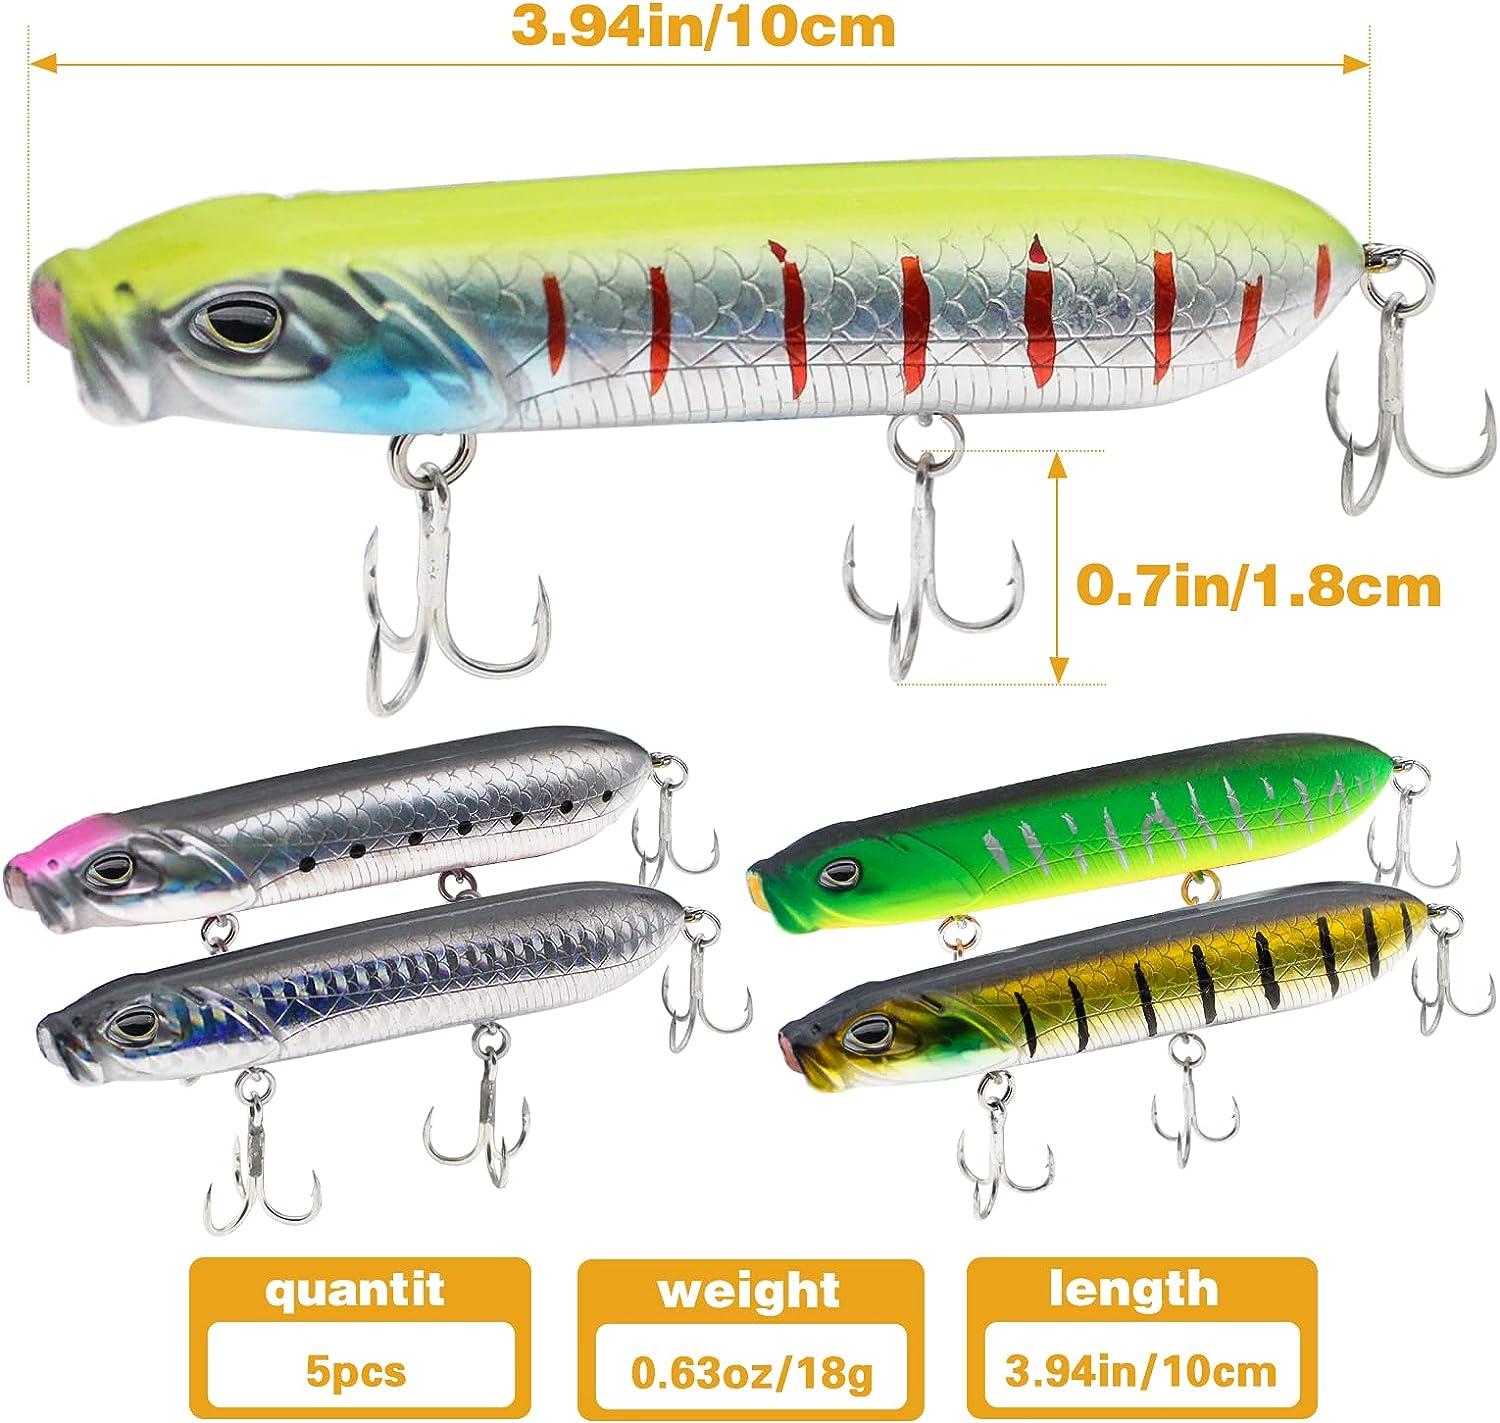 Realistic Iron Plate Fishing Lures for Freshwater and Saltwater